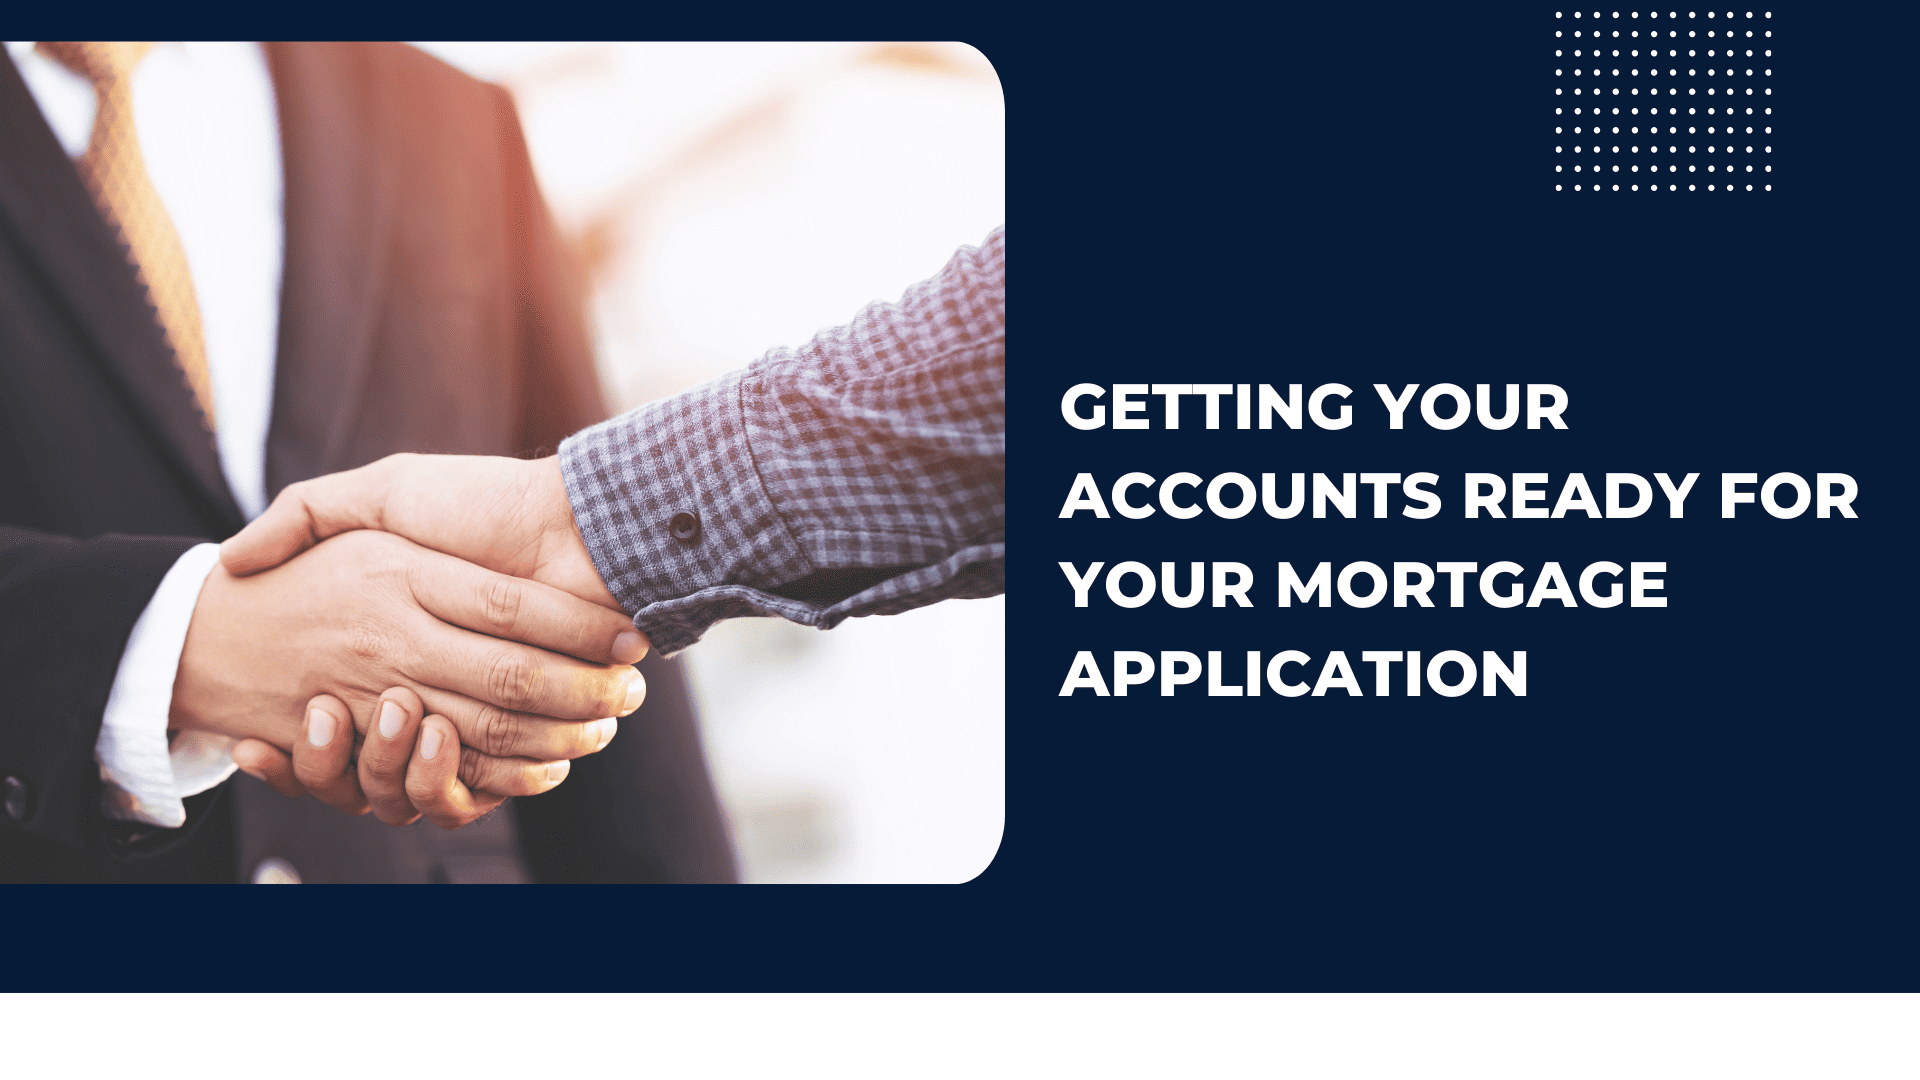 Getting Your Accounts Ready For Your Mortgage Application